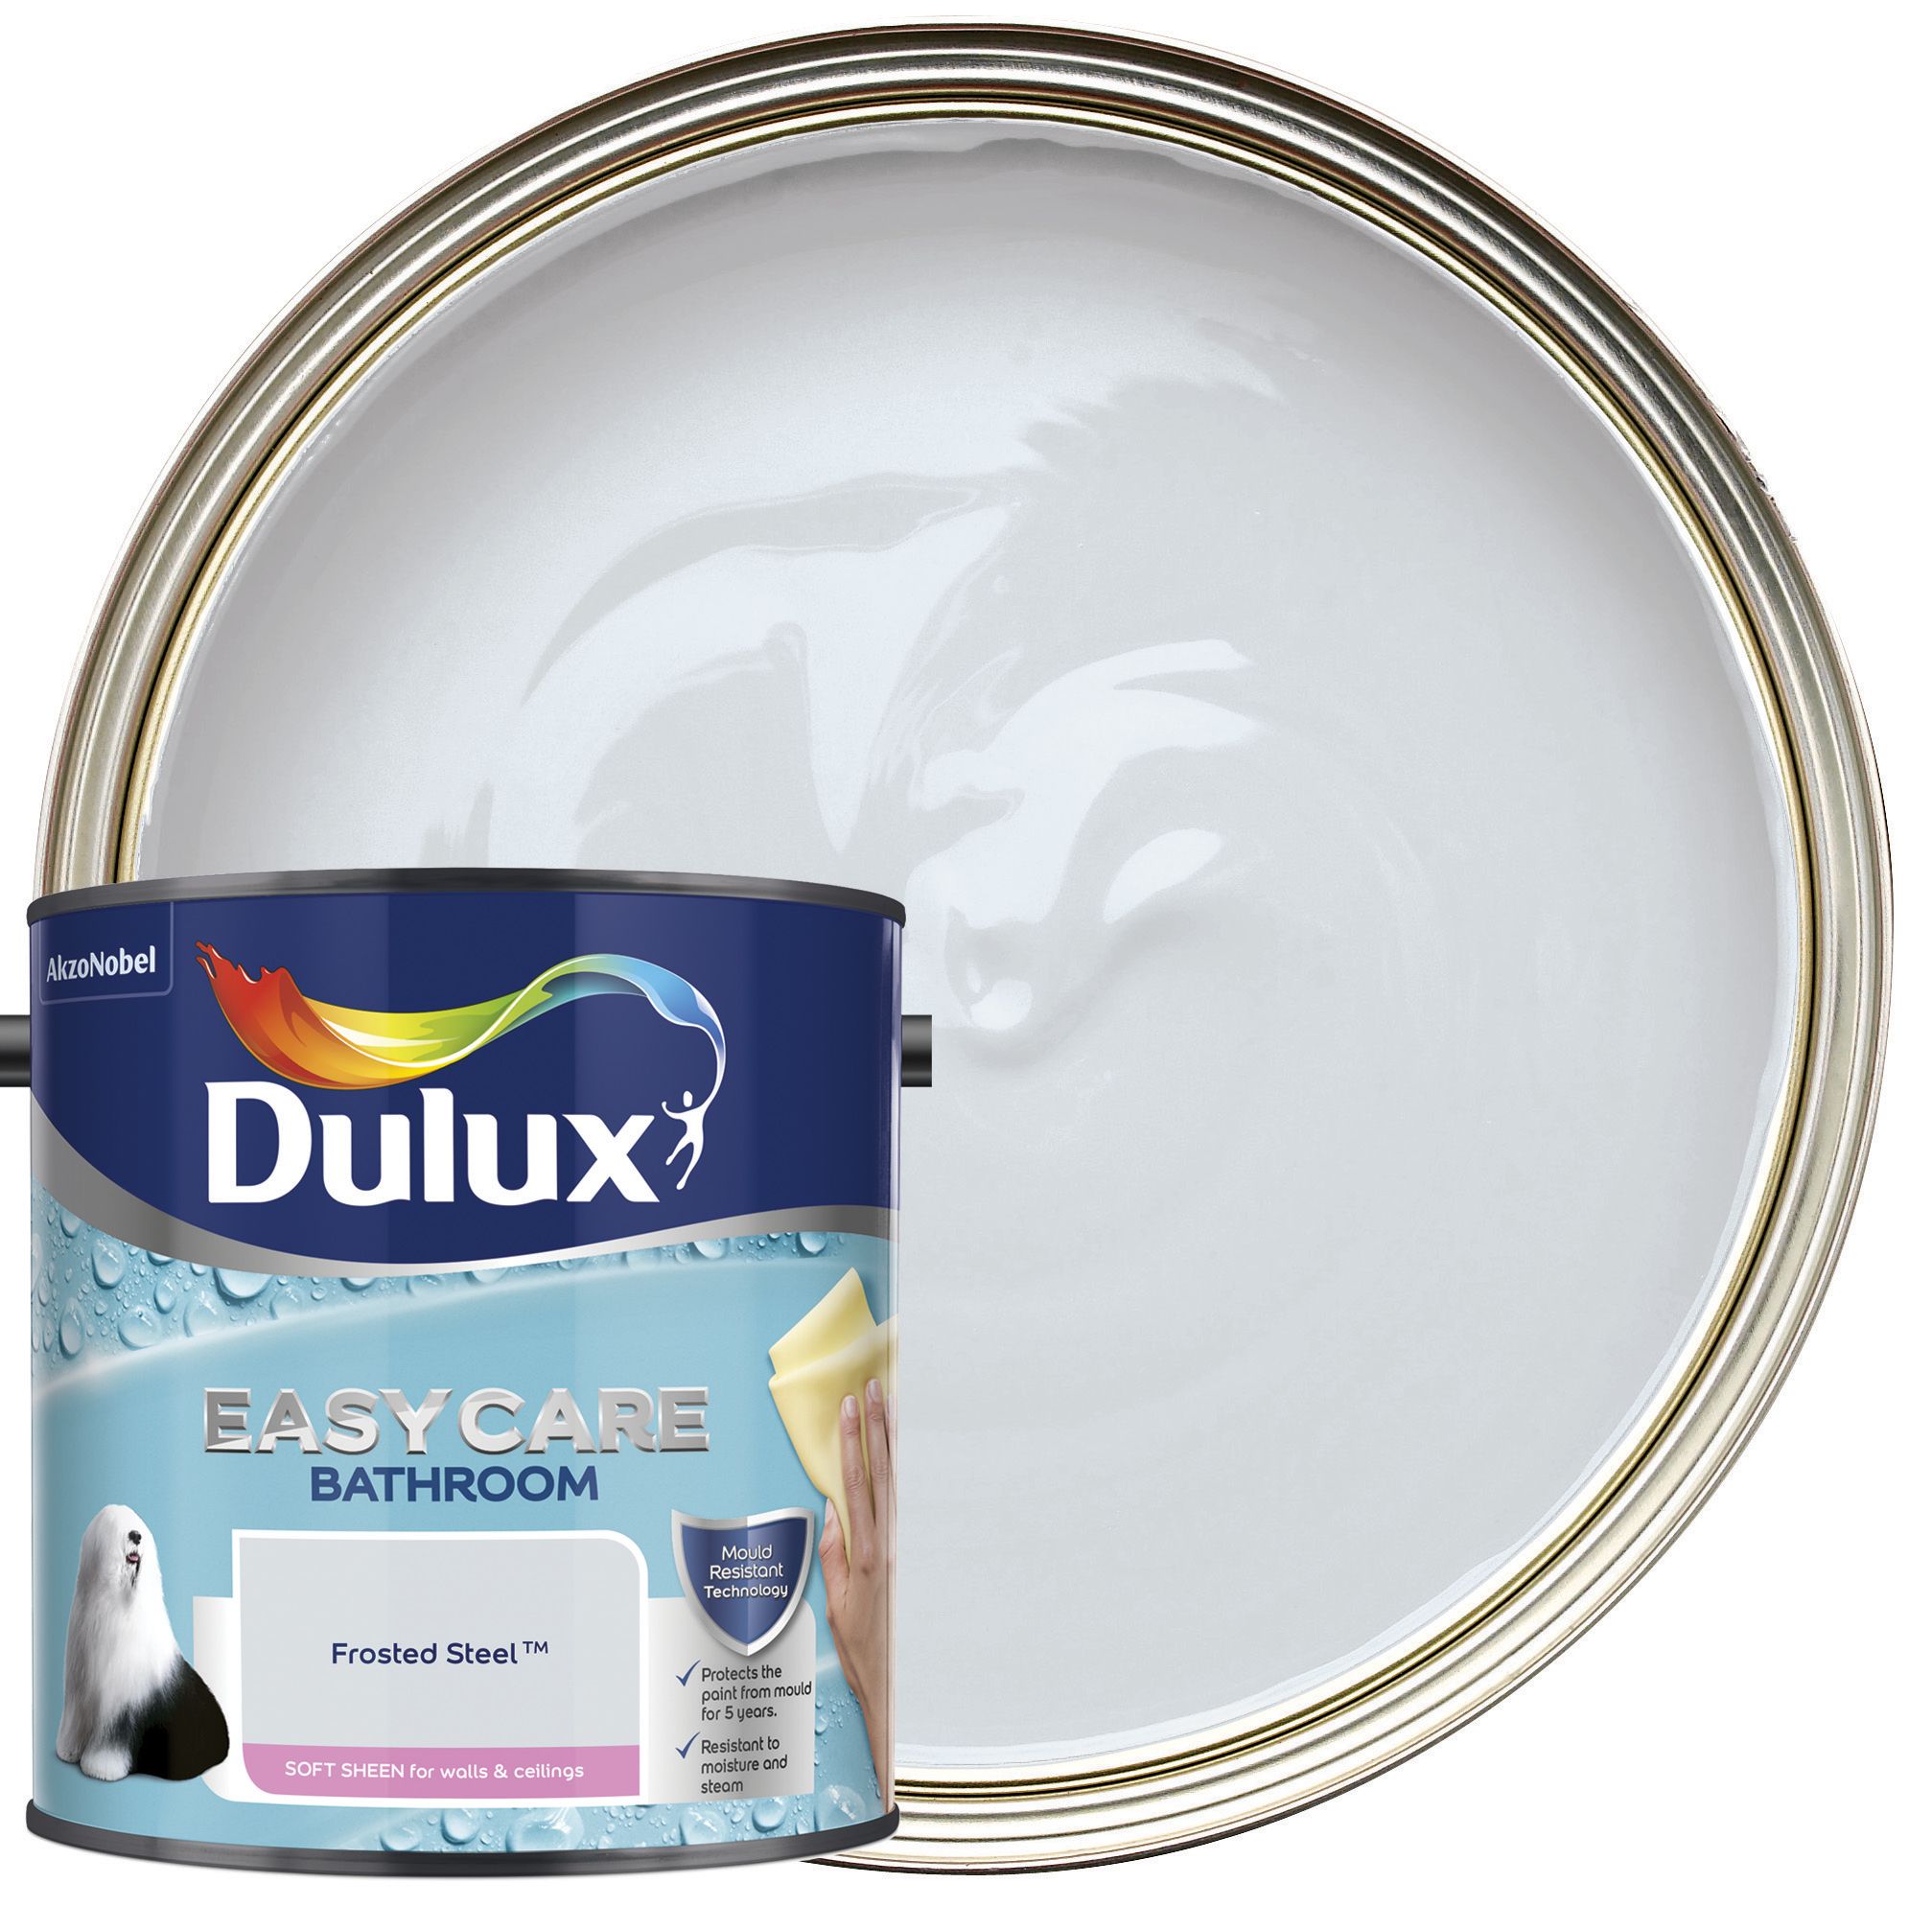 Image of Dulux Easycare Bathroom Soft Sheen Emulsion Paint - Frosted Steel - 2.5L